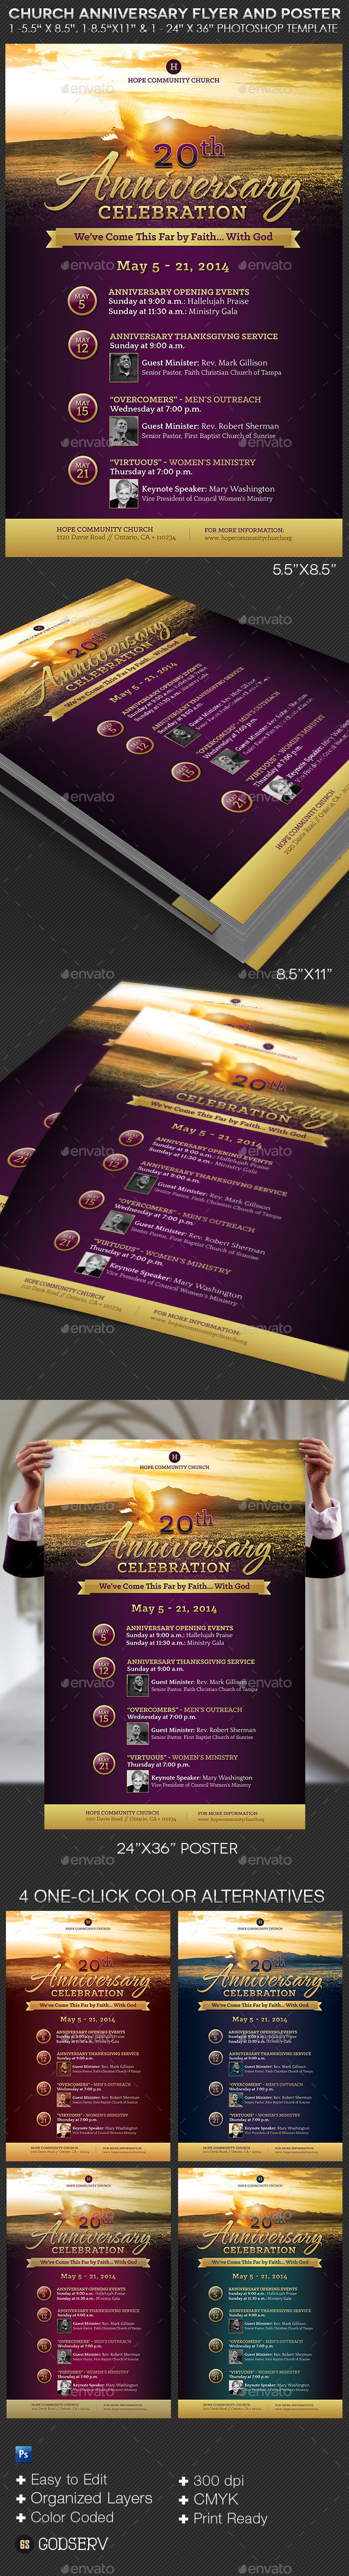 Church anniversary flyer and poster template  preview